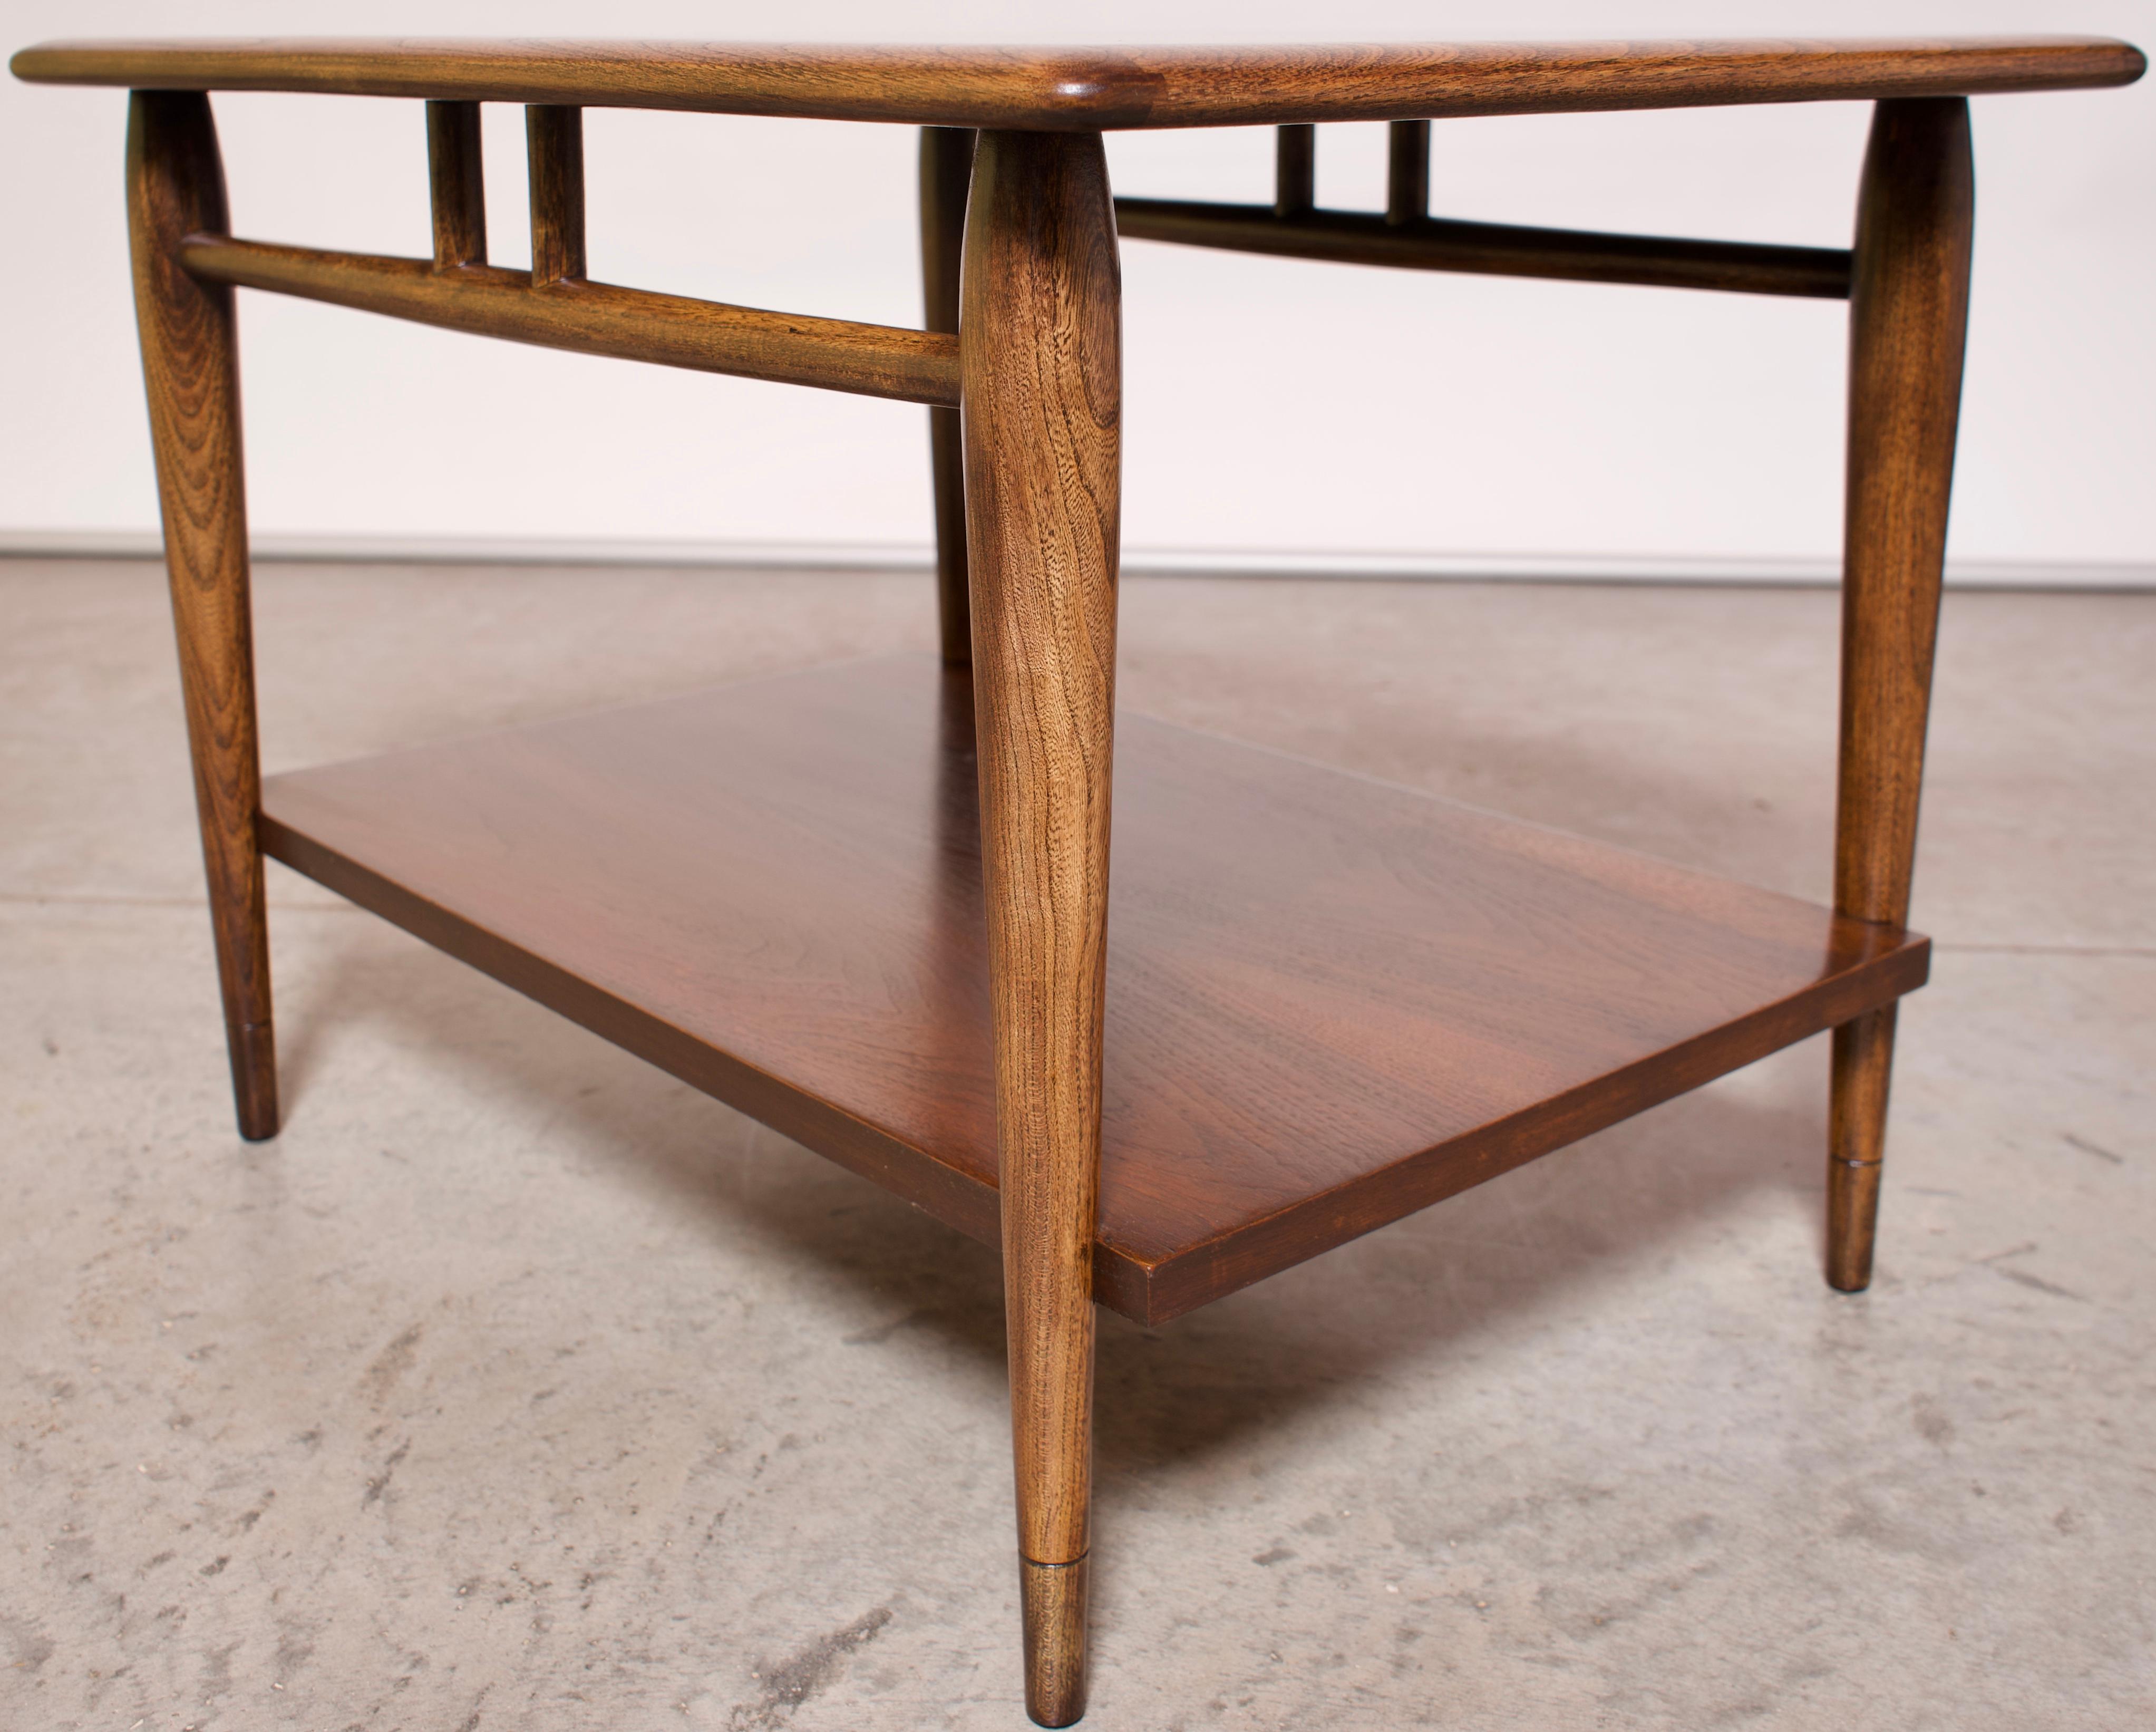 Andre Bus for Lane Acclaim Gunstock walnut side table. Acclaim series side table with shelf by Andre Bus for Lane. The Acclaim series side table features a two-tone top made of gunstock walnut with pecan dovetail inlays, rounded tabletop edges,